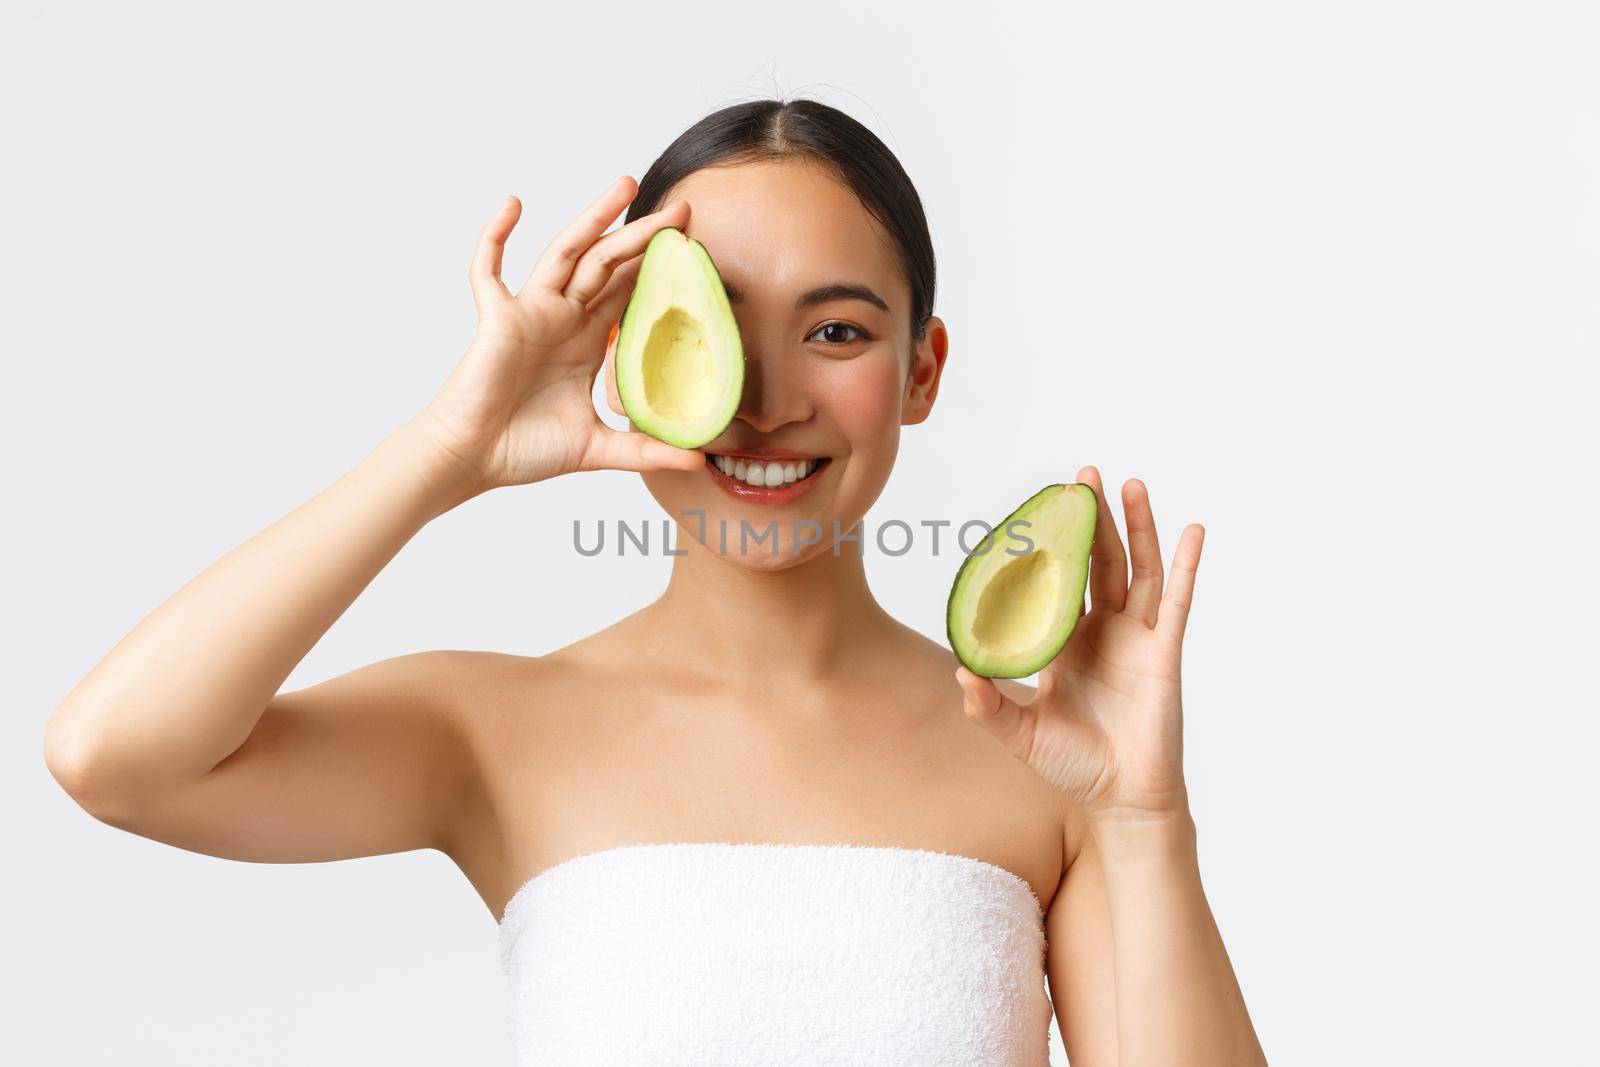 Beauty, personal care, spa and skincare concept. Close-up of tender feminine asian woman in bath towel, smiling and showing avocado near face, advertisement of face mask, cleanser or cream.